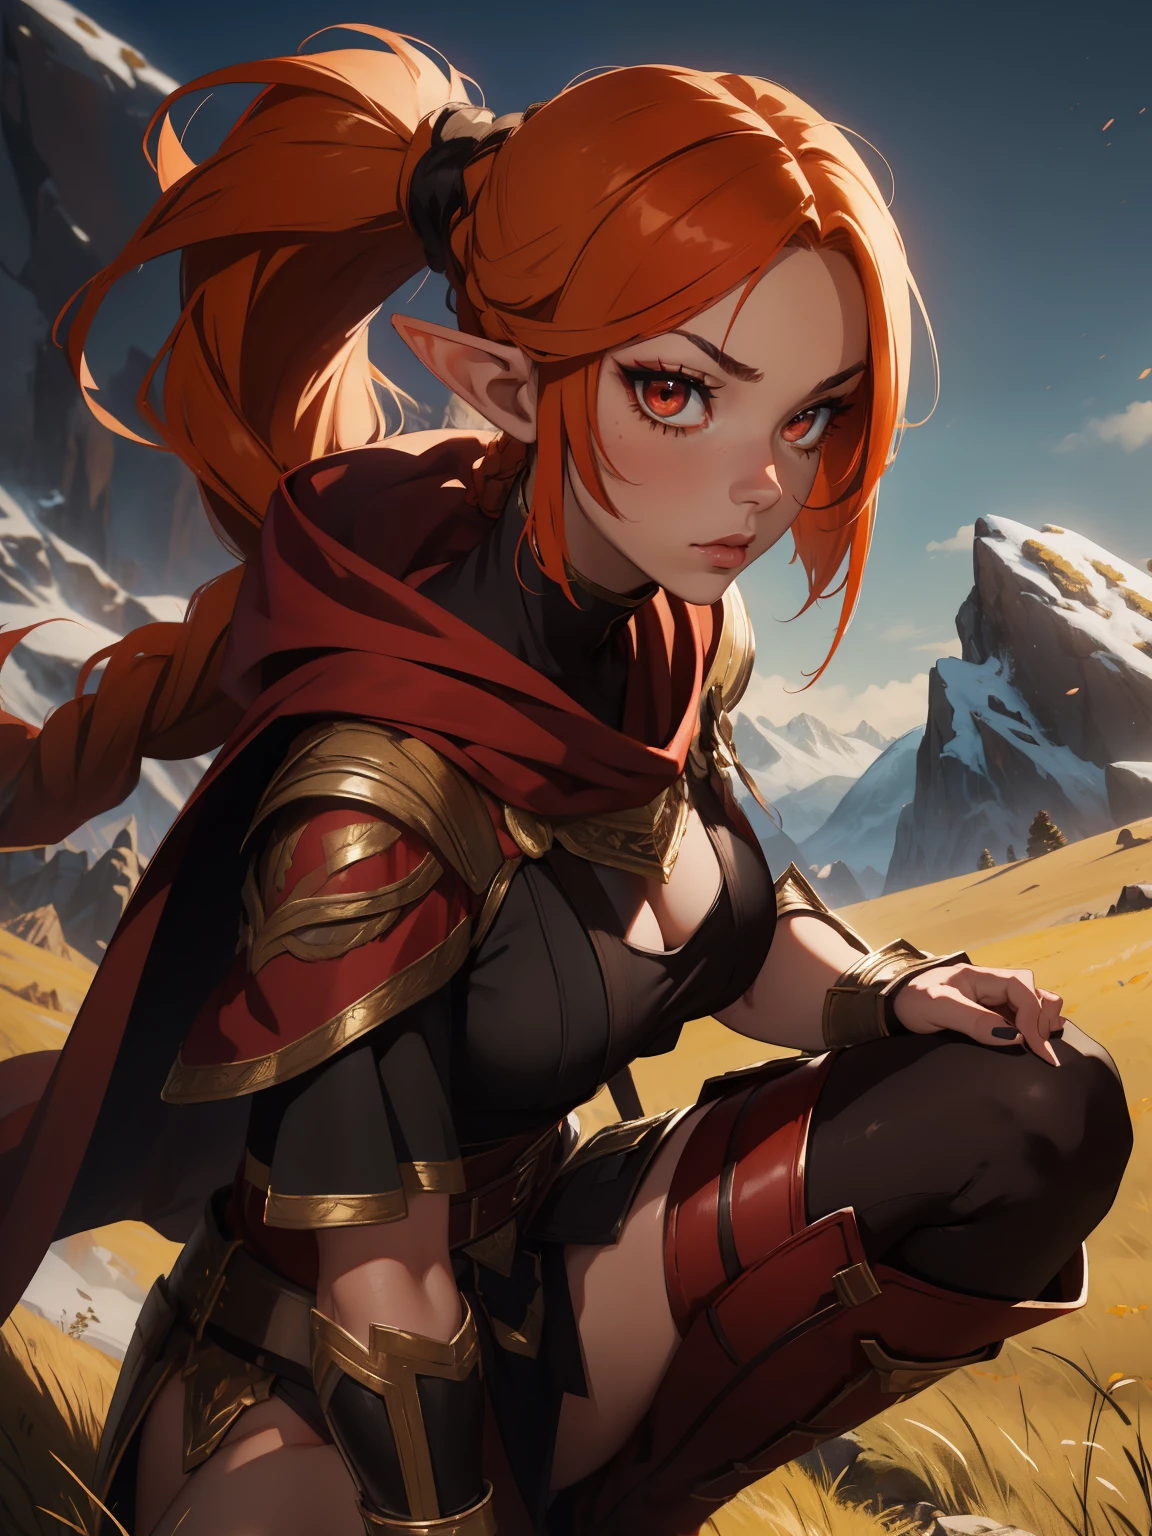 masterpiece, high quality, 1_woman, ((upper body)), (Caucasian skin_complexion:1.4),mature, looking at the viewer, black face, tall, beautiful, exotic, with long elf ears, long hair, (braided ponytail), orange hair, detailed face, having diamond shaped eyes, (wearing eye patch), red eye, (dark_eyeliner), long_eyelashes medium_bust, wearing gladiator armor, red cape, long fingerless_gloves, belts, making fist, black thigh highs with embroidery, knee boots, dynamic lighting casts detailed shadows, on a grass grassy hill, mountains in the distance,